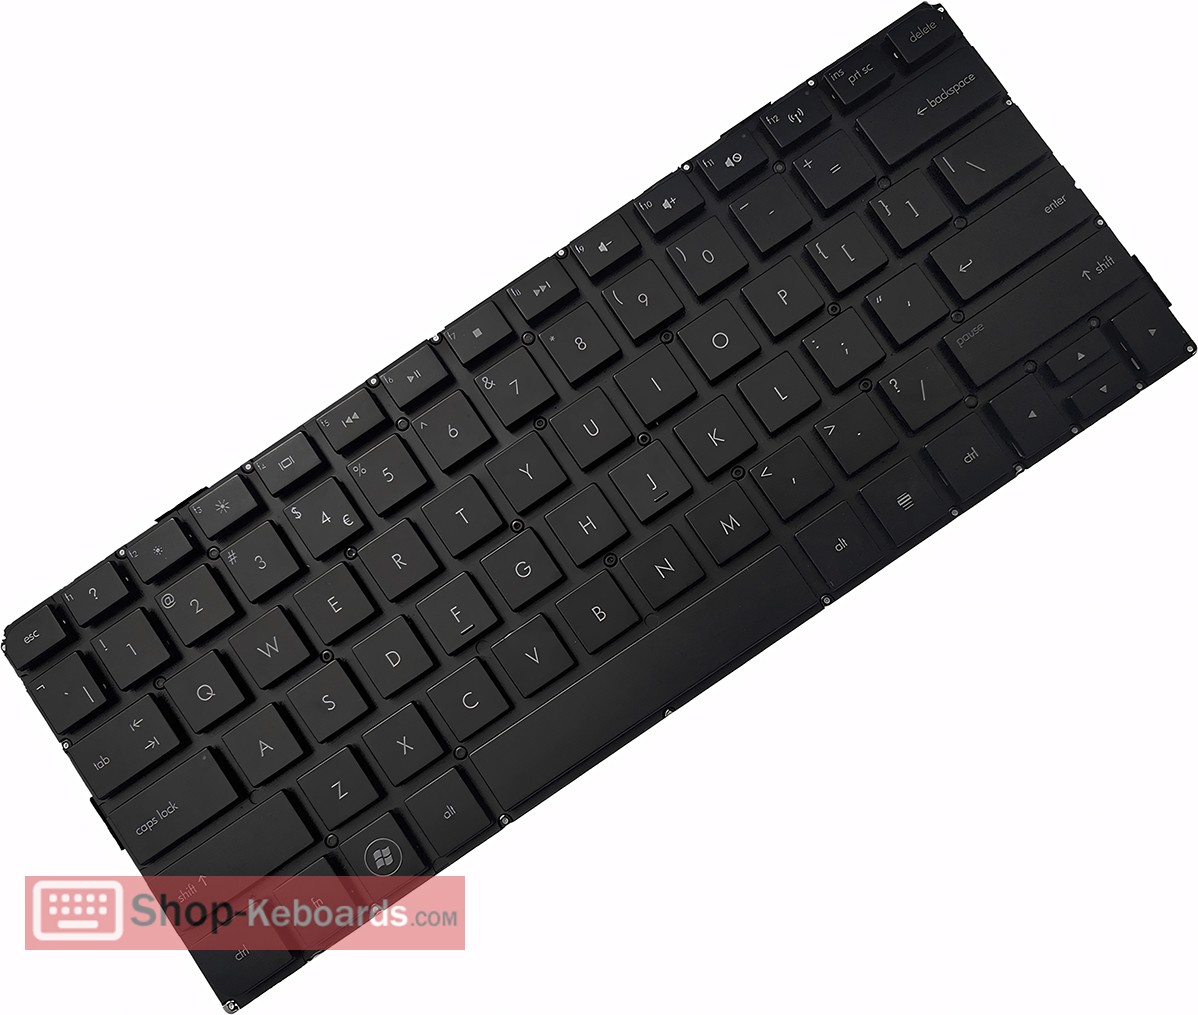 HP ENVY 13-1110 SERIES Keyboard replacement